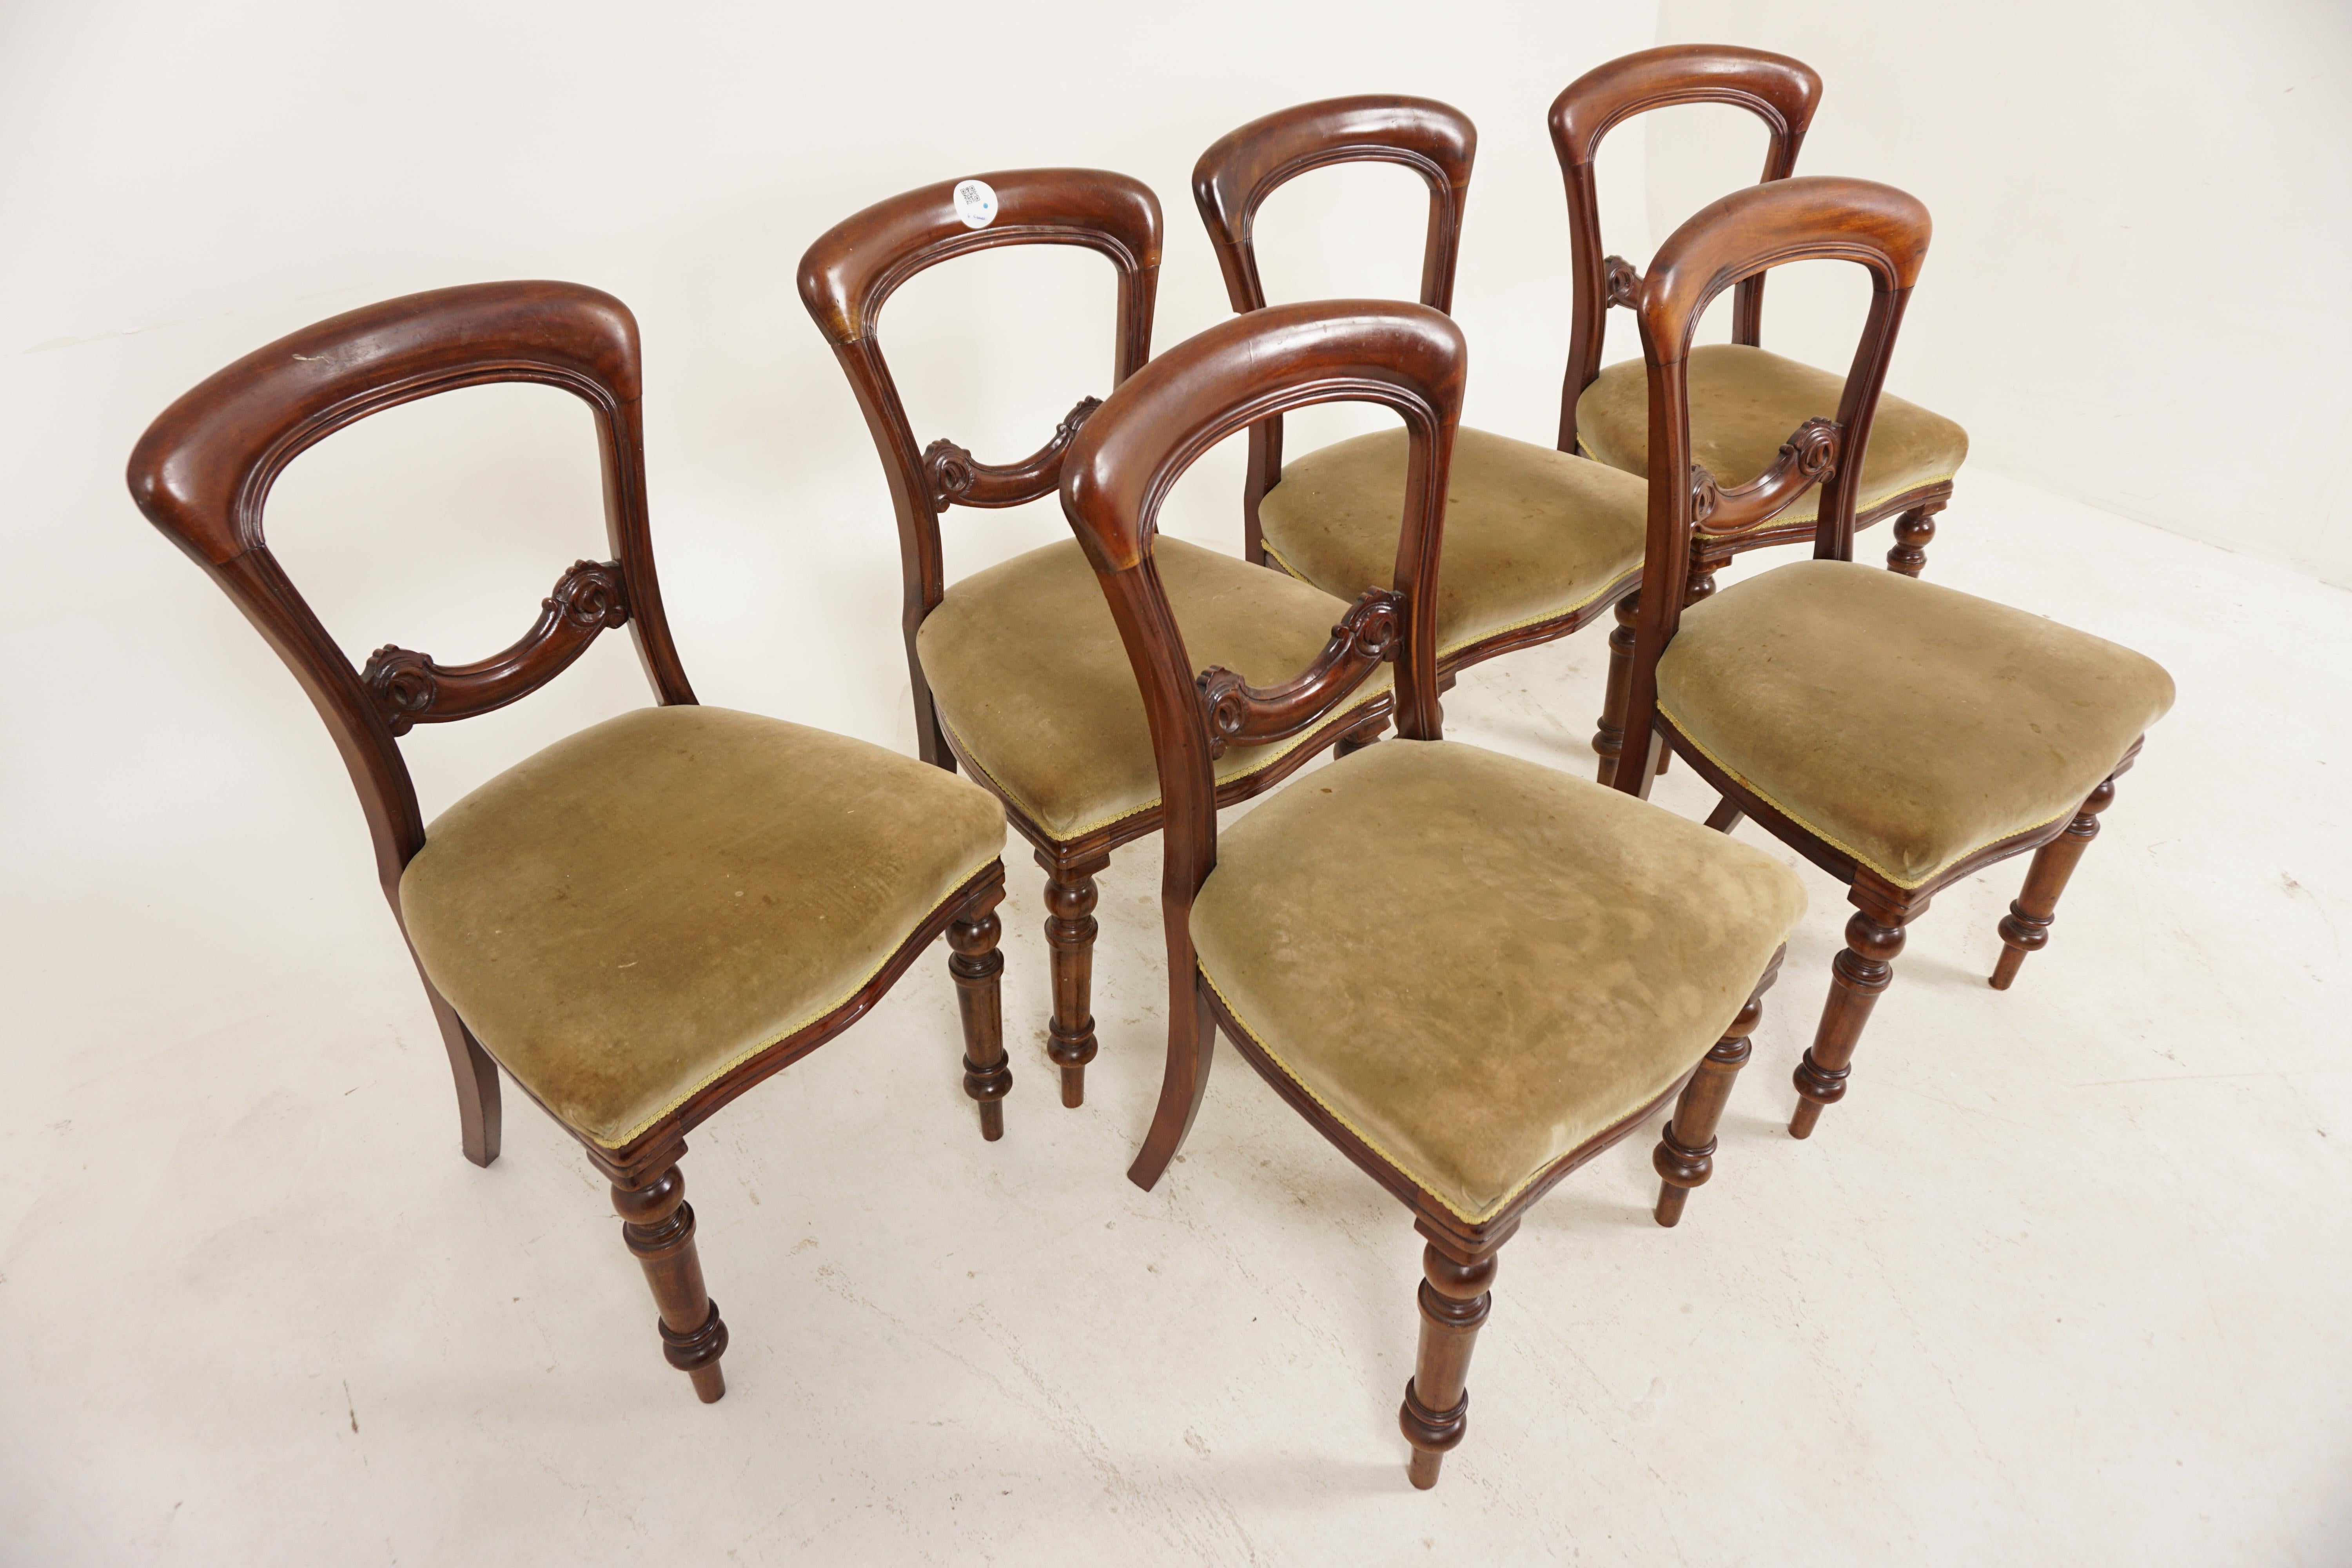 Scottish Set of 6 Victorian Carved Walnut Upholstered Dining Chairs, Scotland 1880, H924